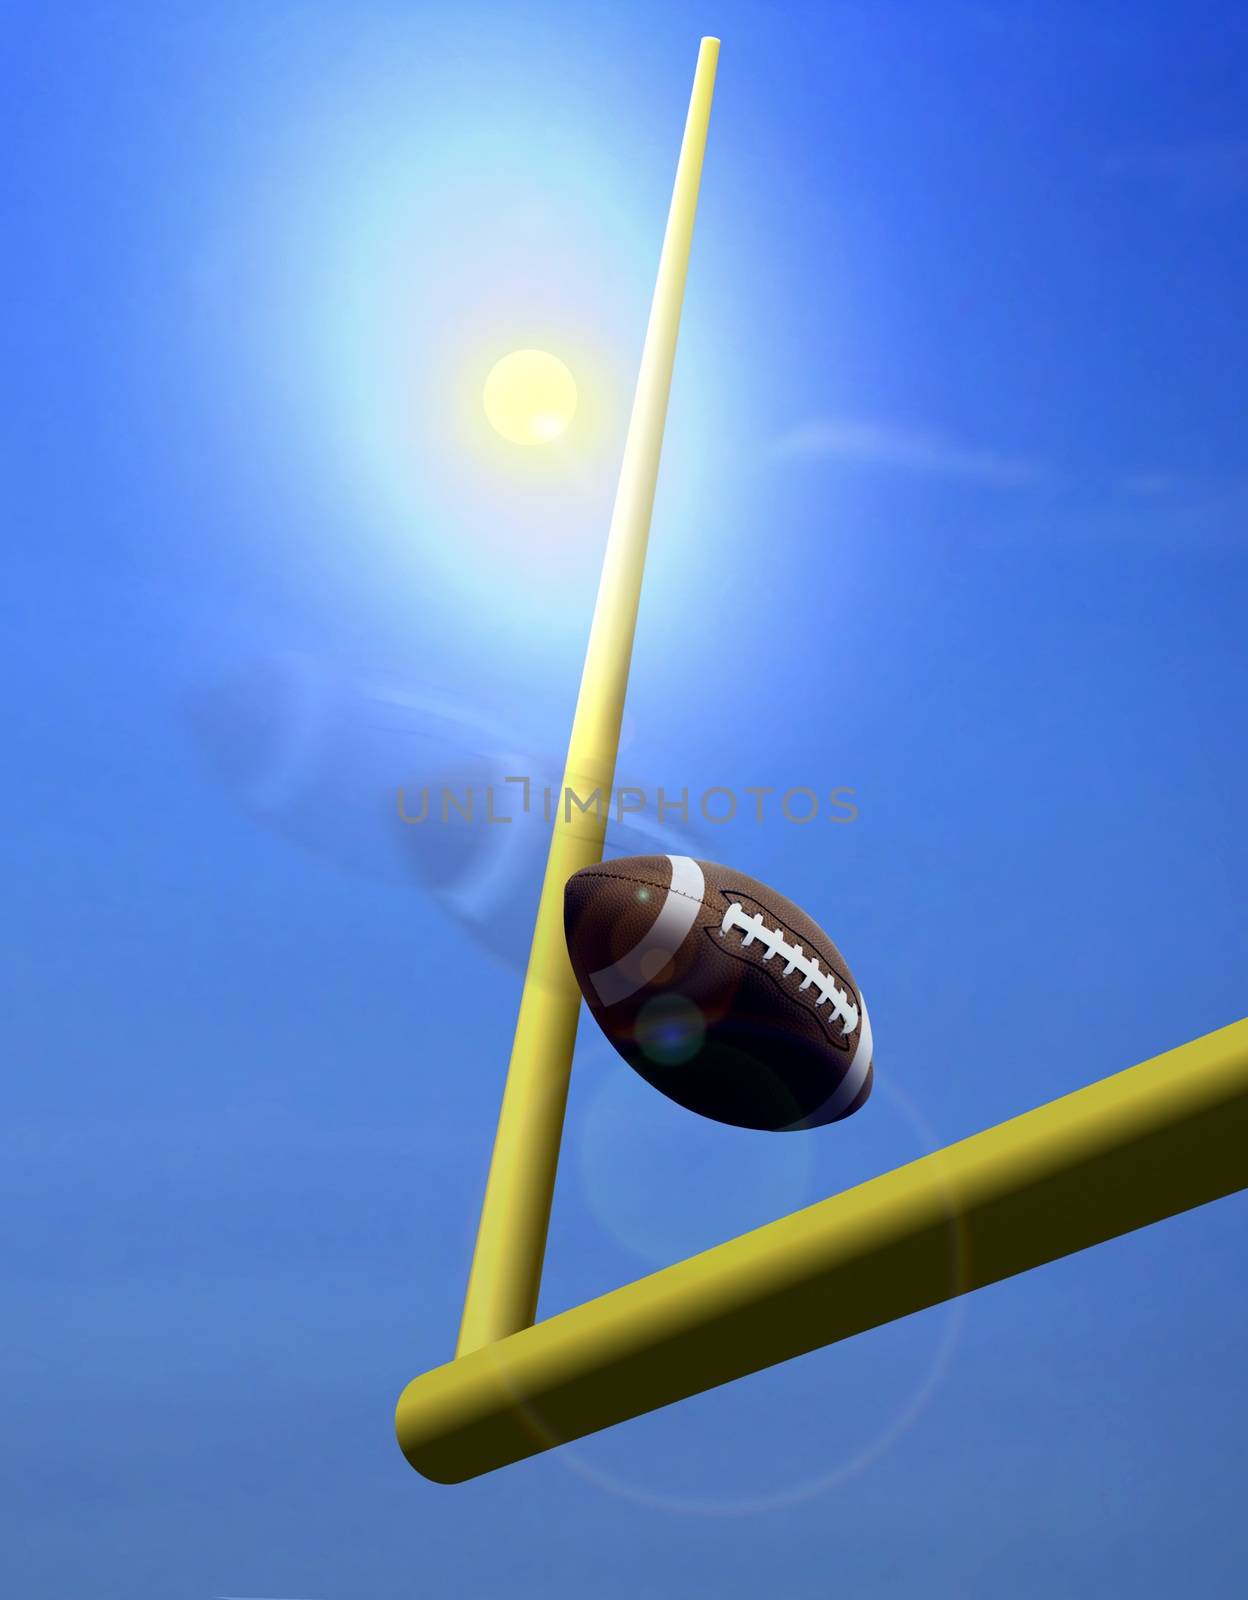 Football and Goal Post under  Sunlight by razihusin